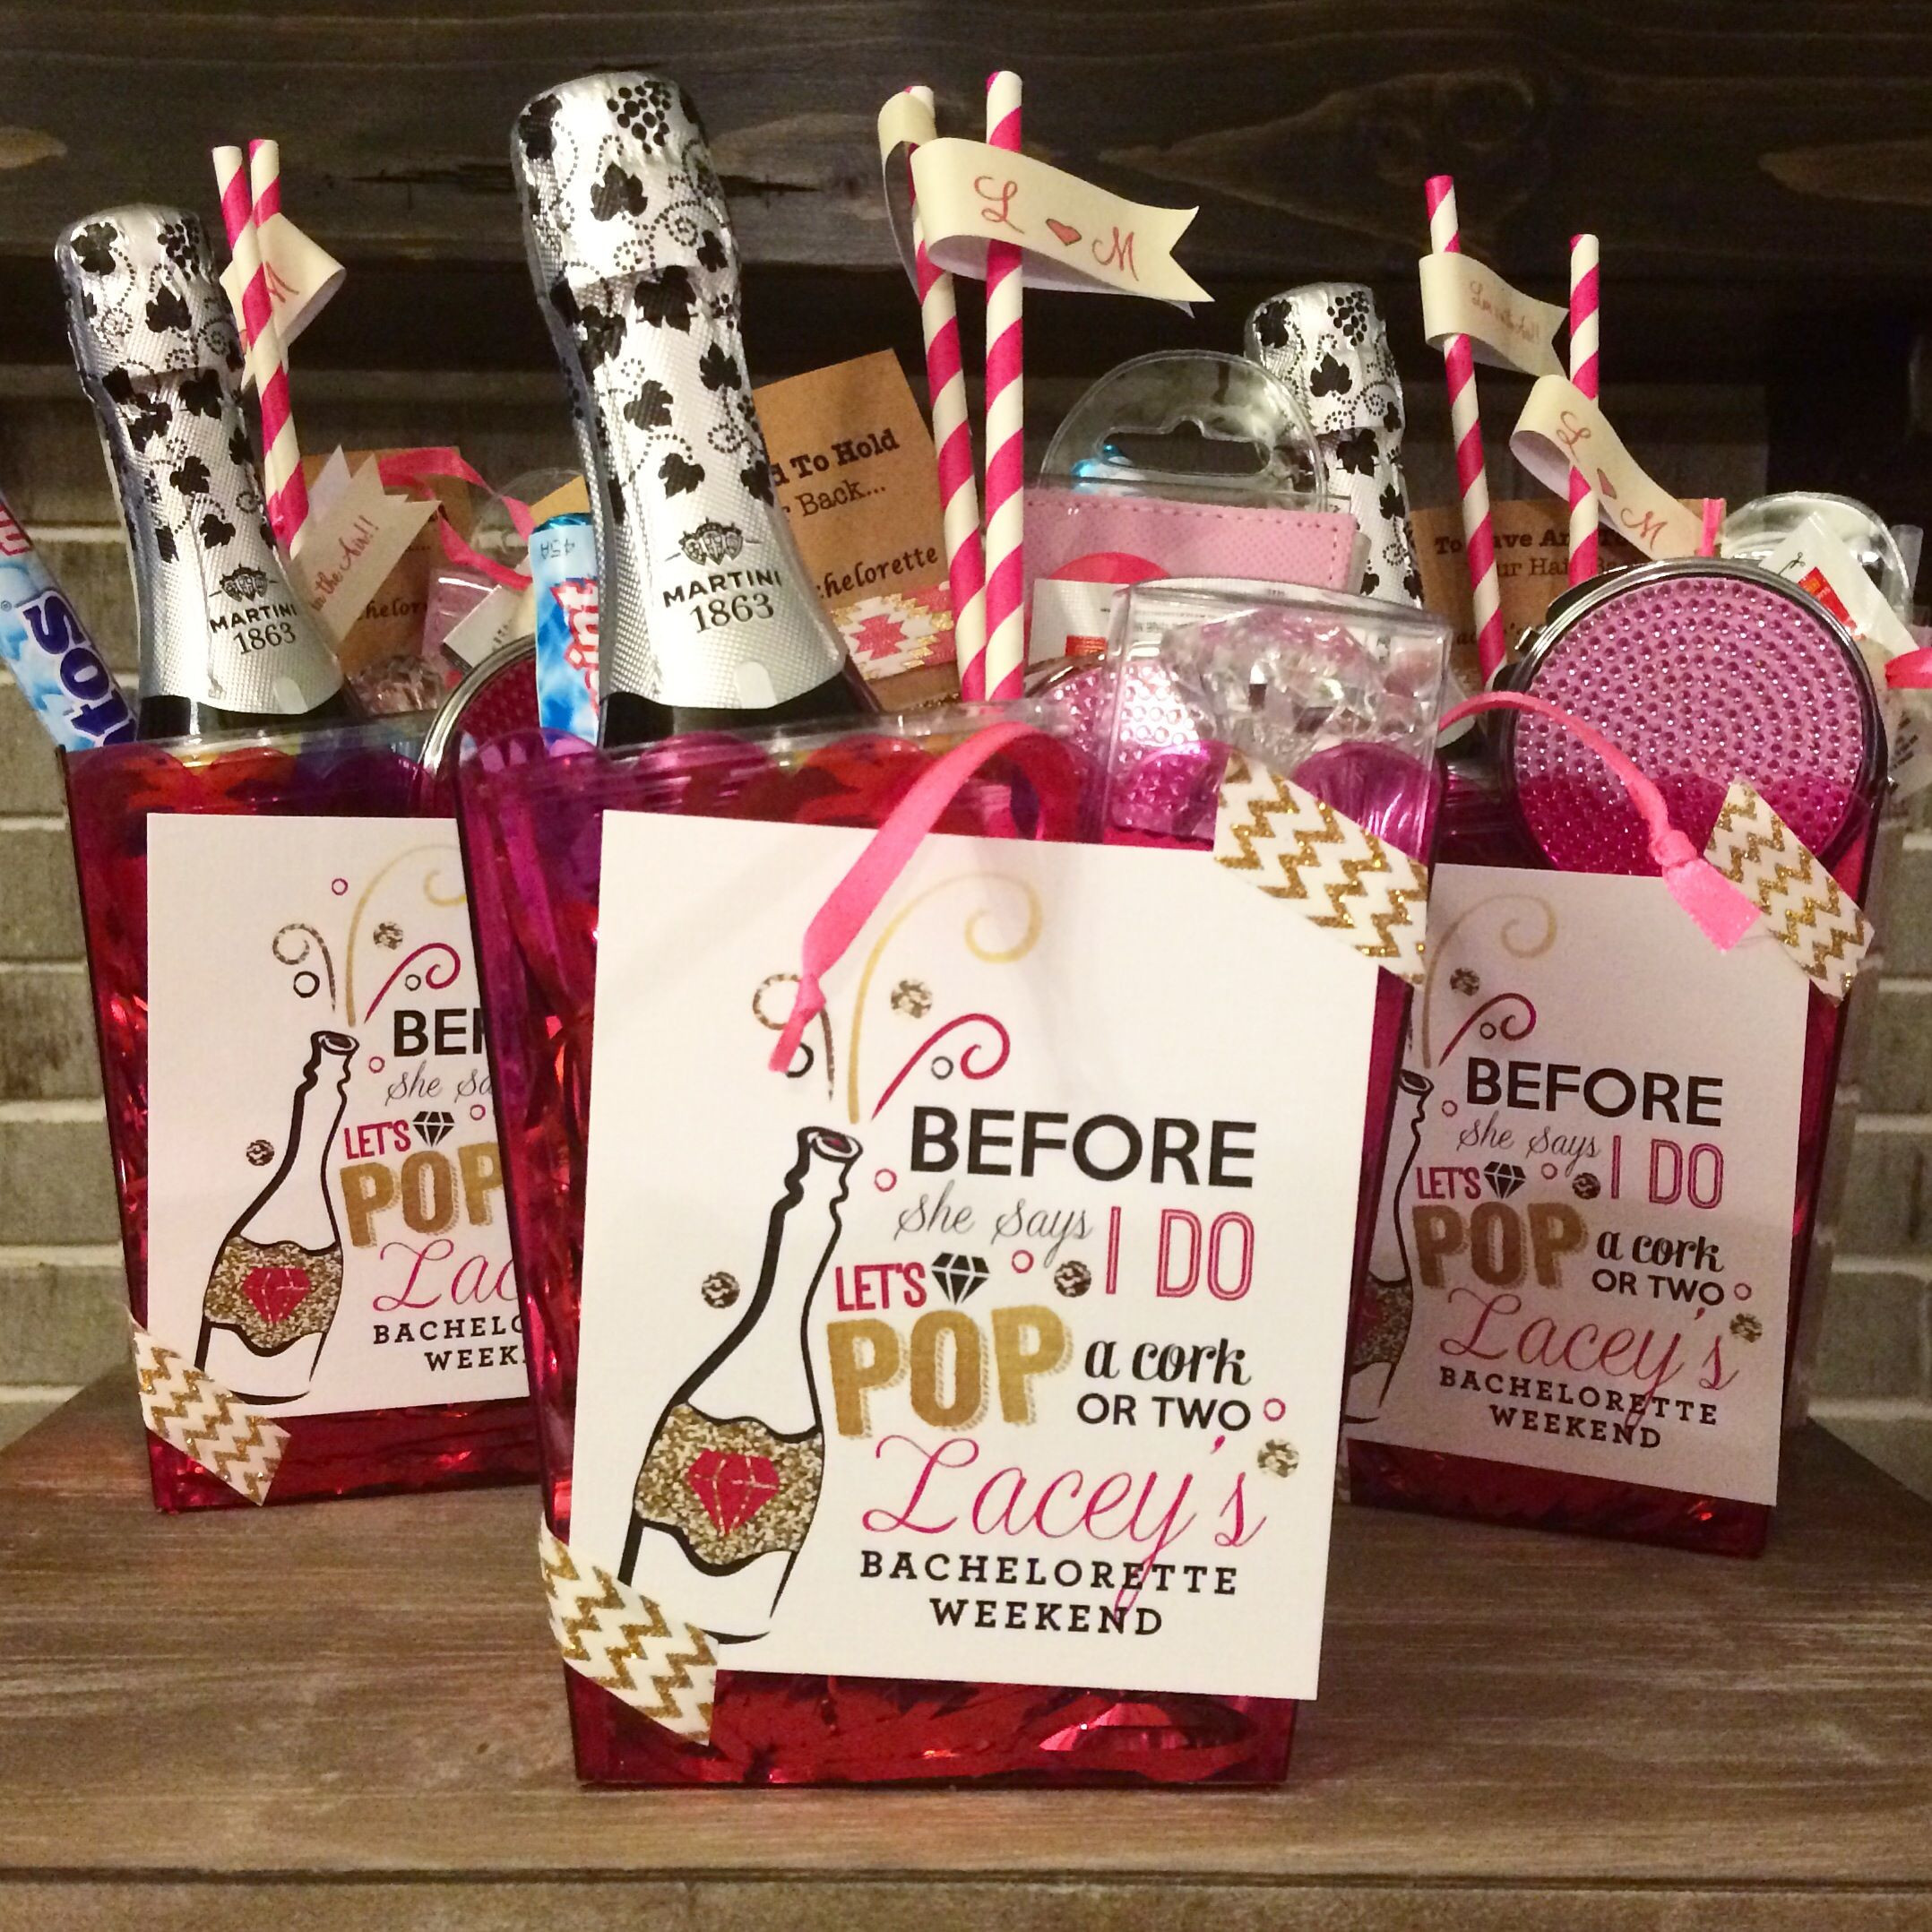 Bachelorette Party Bag Ideas
 Before she says I do let s pop a cork or two Custom